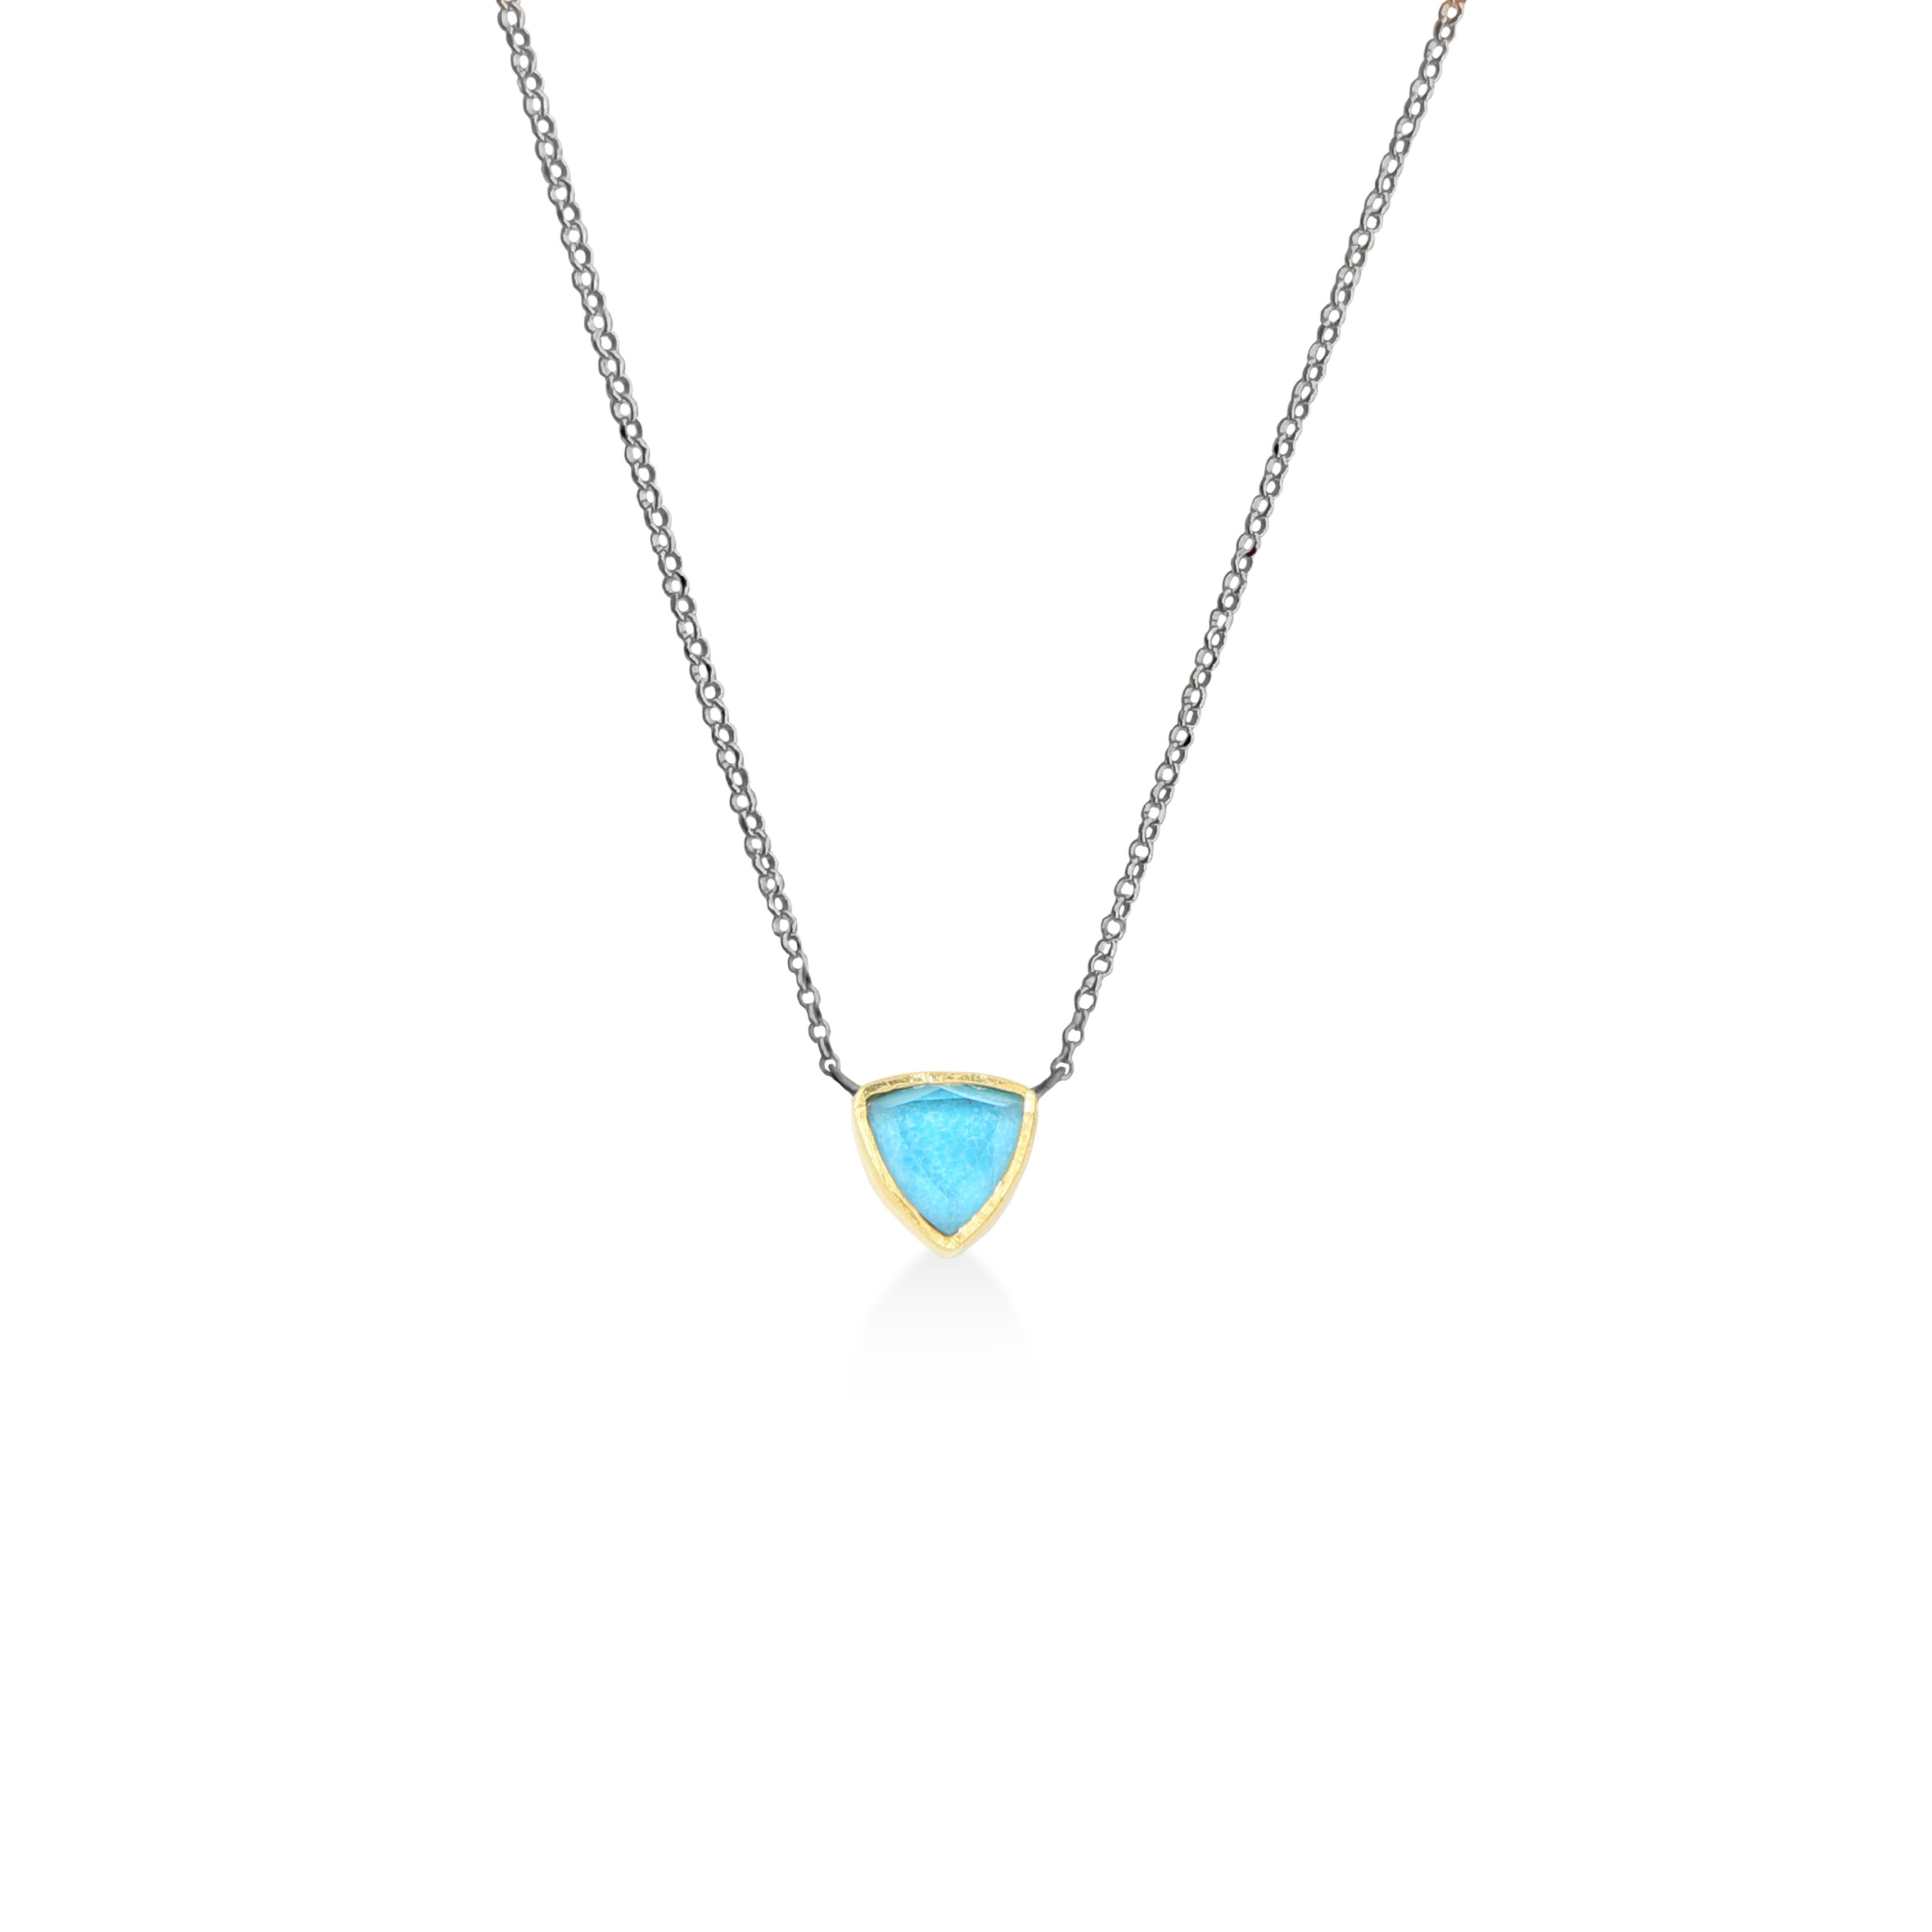 Turquoise Tear Necklace - The Nancy Smillie Shop - Art, Jewellery & Designer Gifts Glasgow